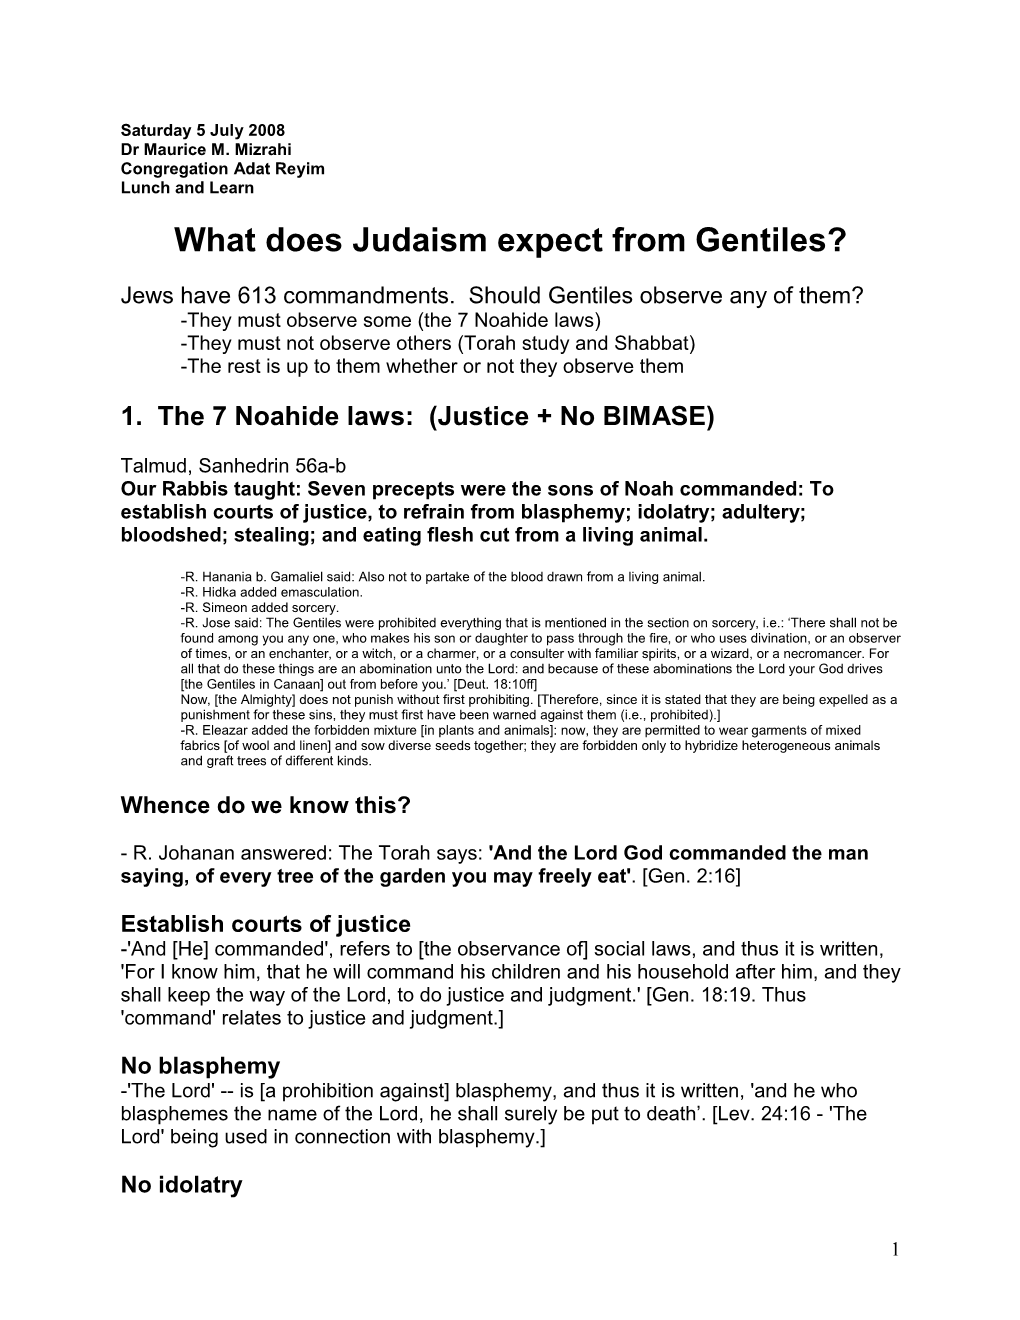 What Does Judaism Expect from Gentiles?